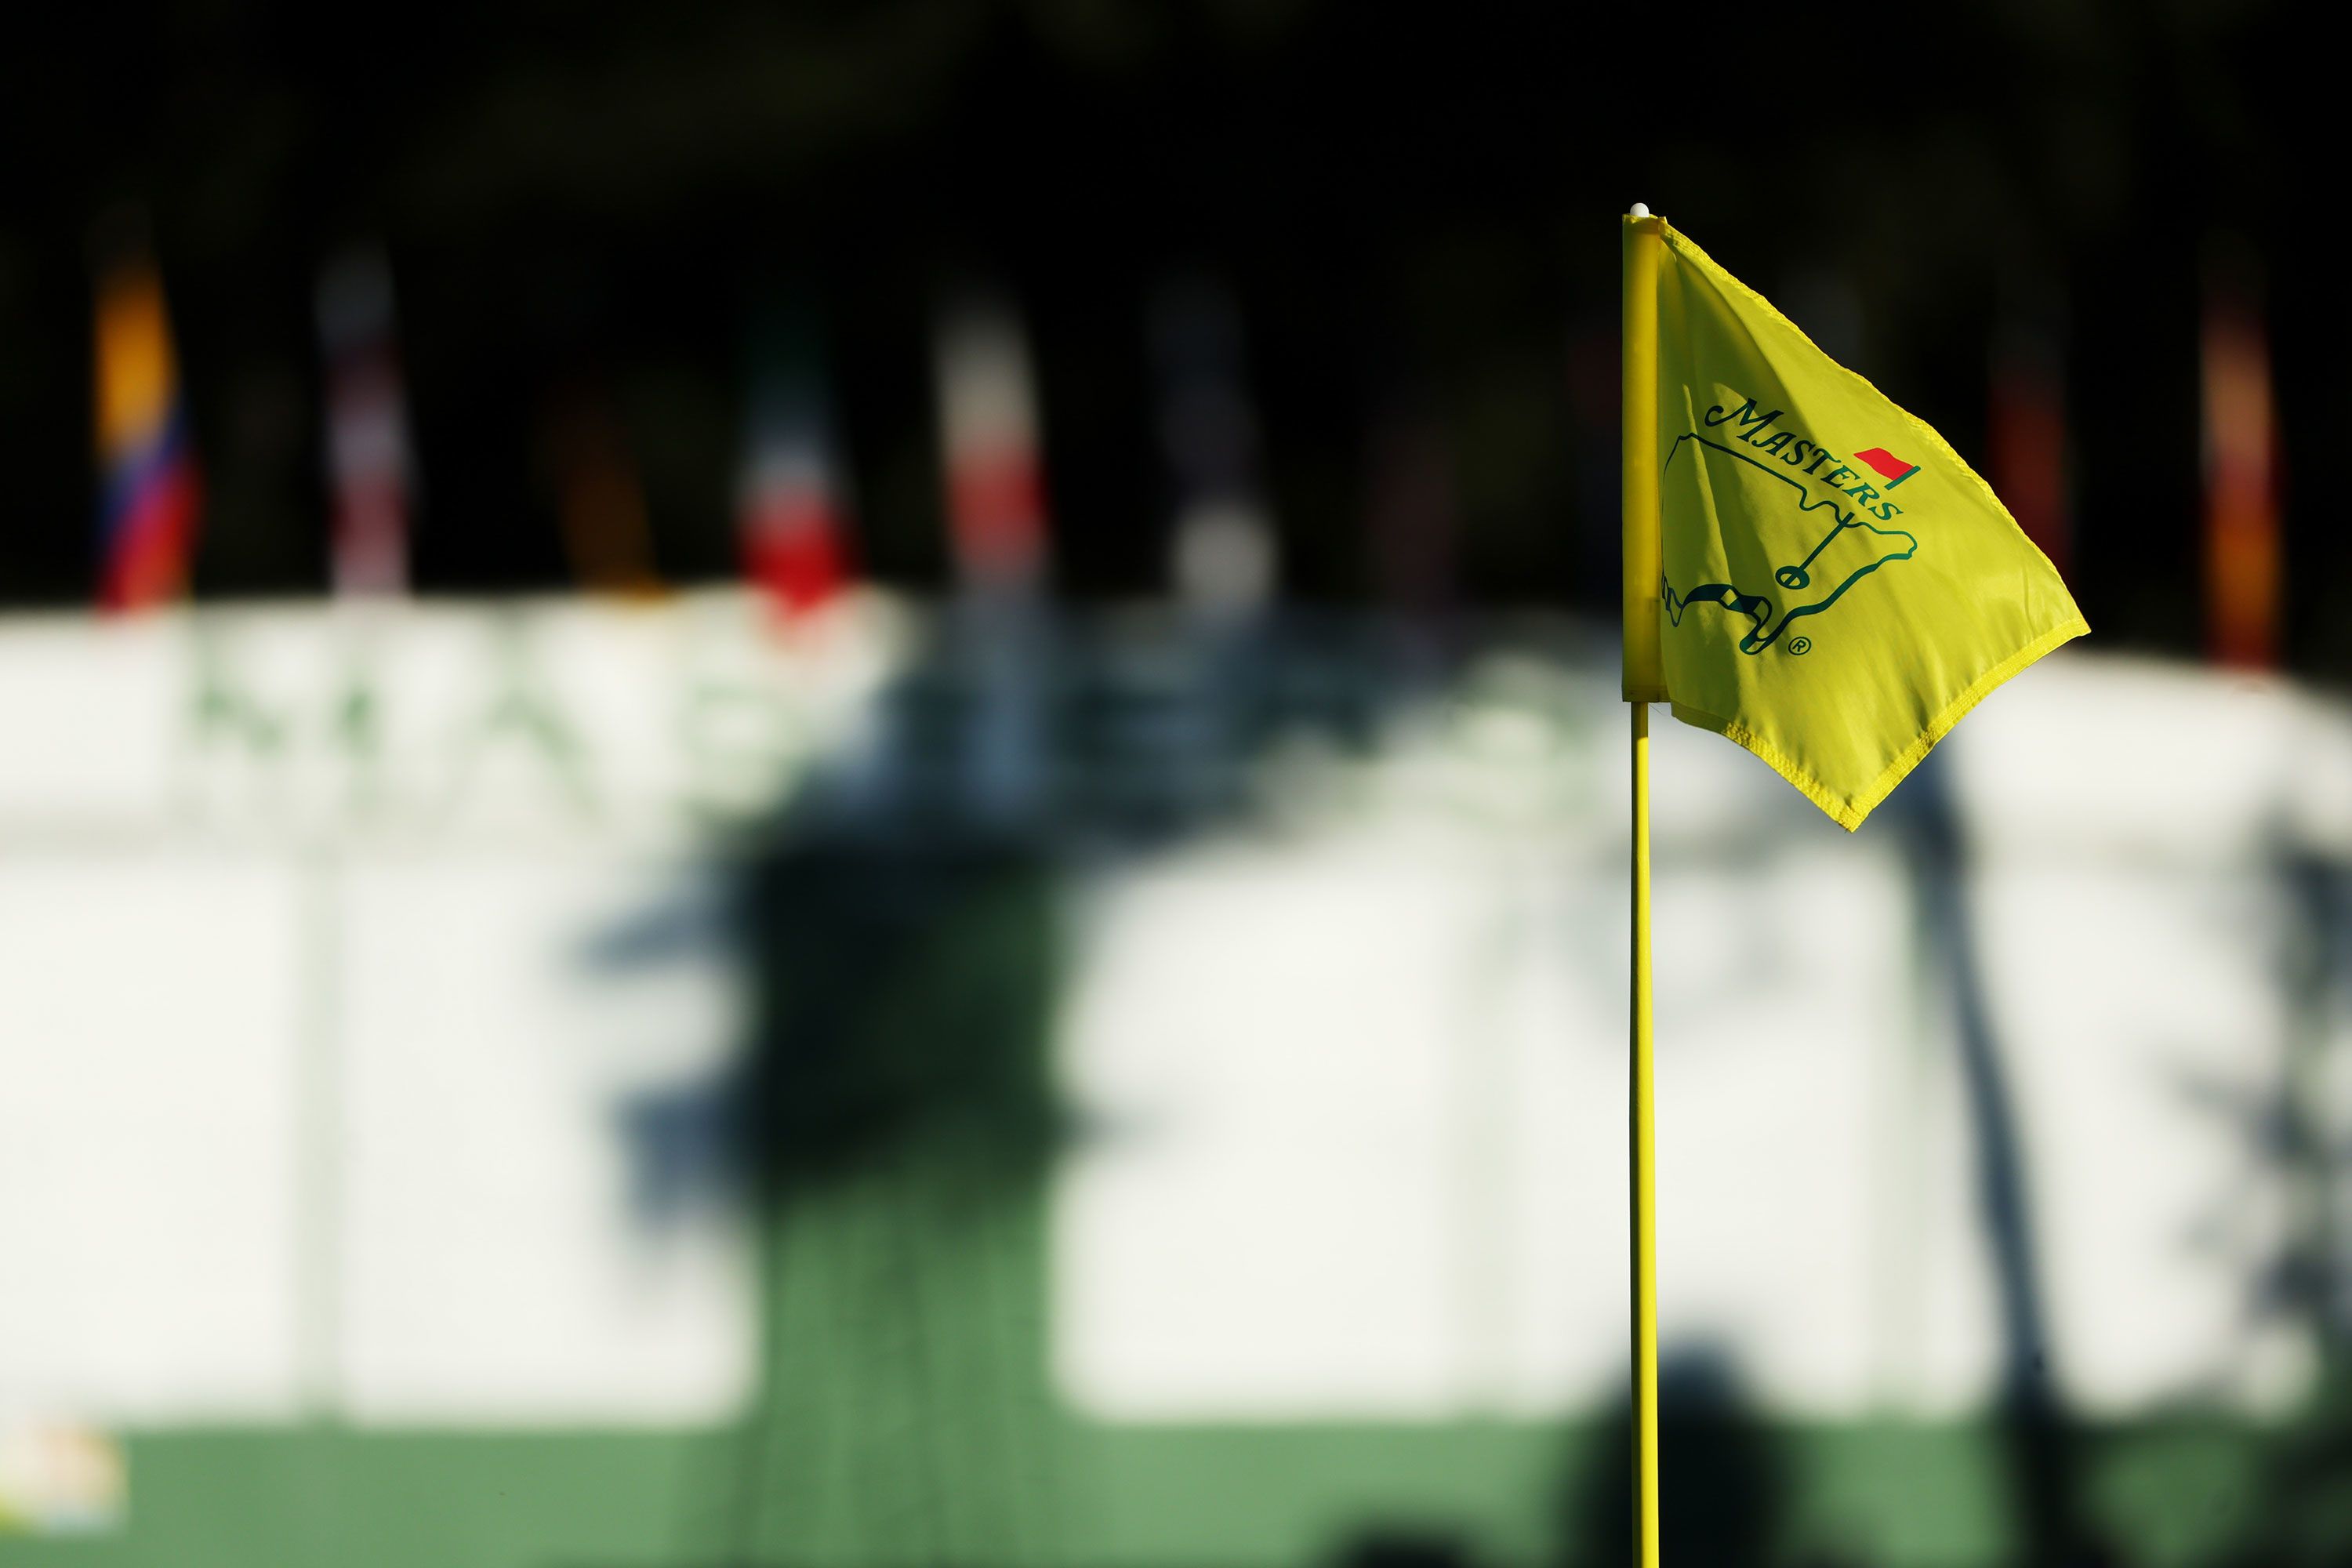 How to watch the Masters, Round 3: Scores, tee times, TV times